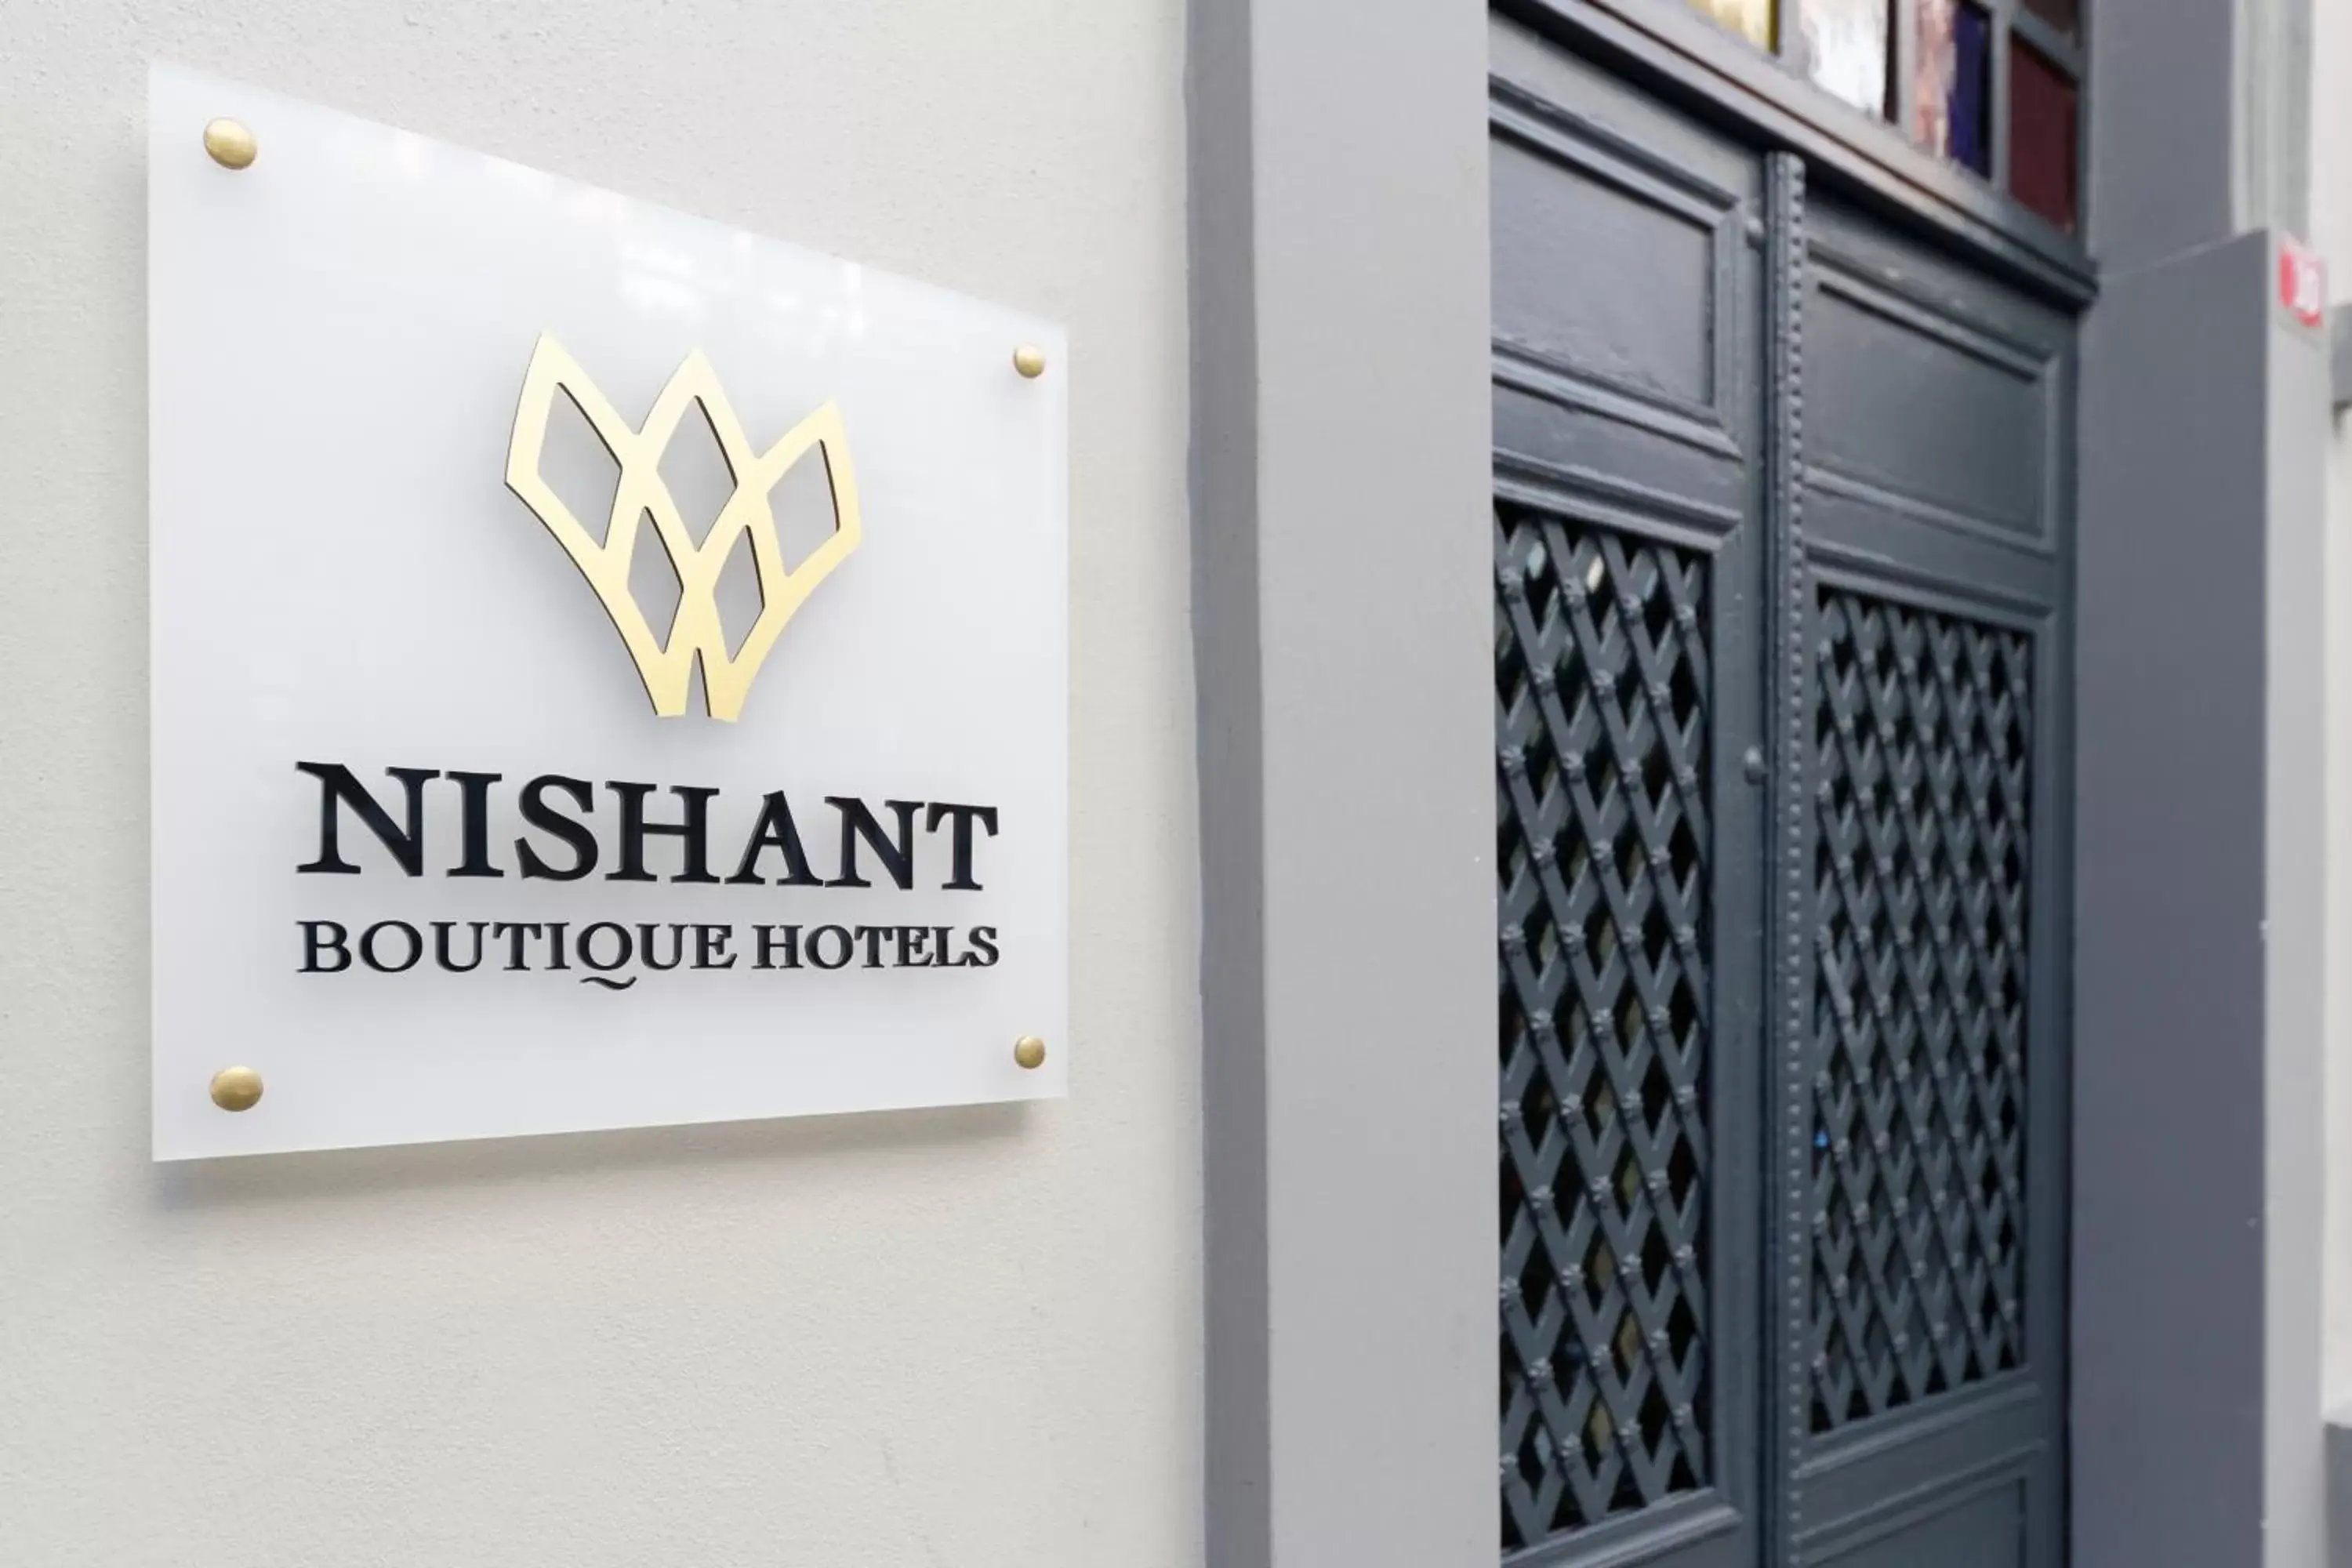 Off site in Nishant Hotel